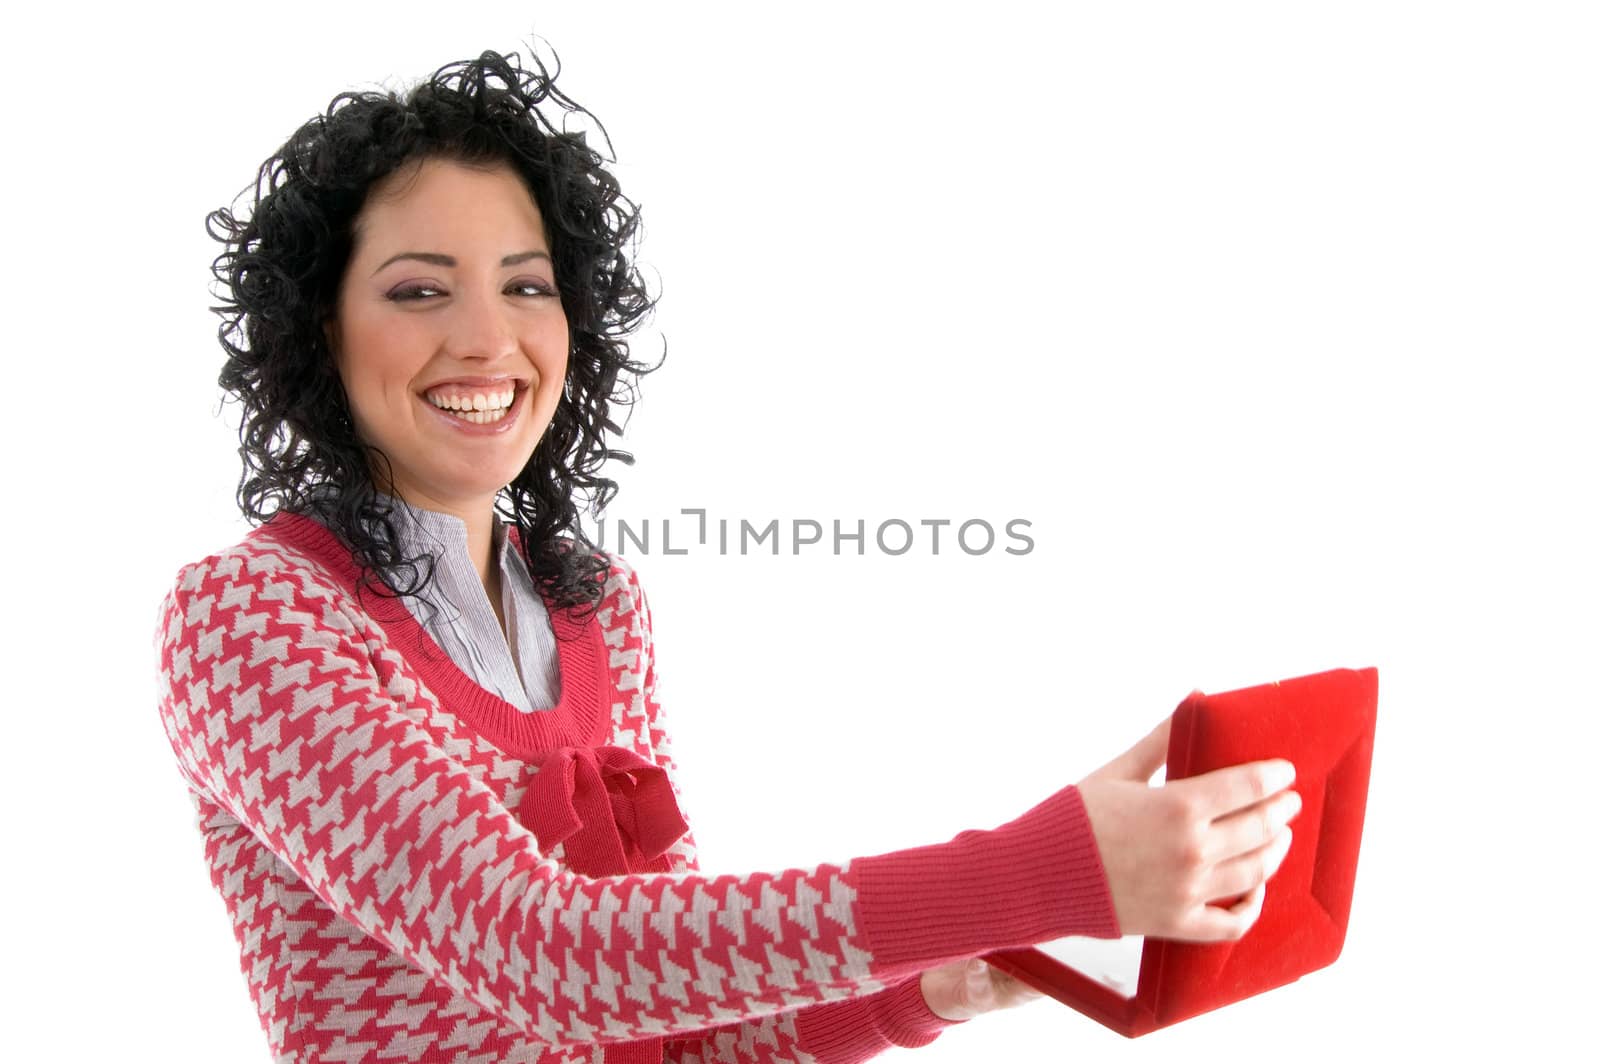 side view of smiling woman posing with necklace box by imagerymajestic